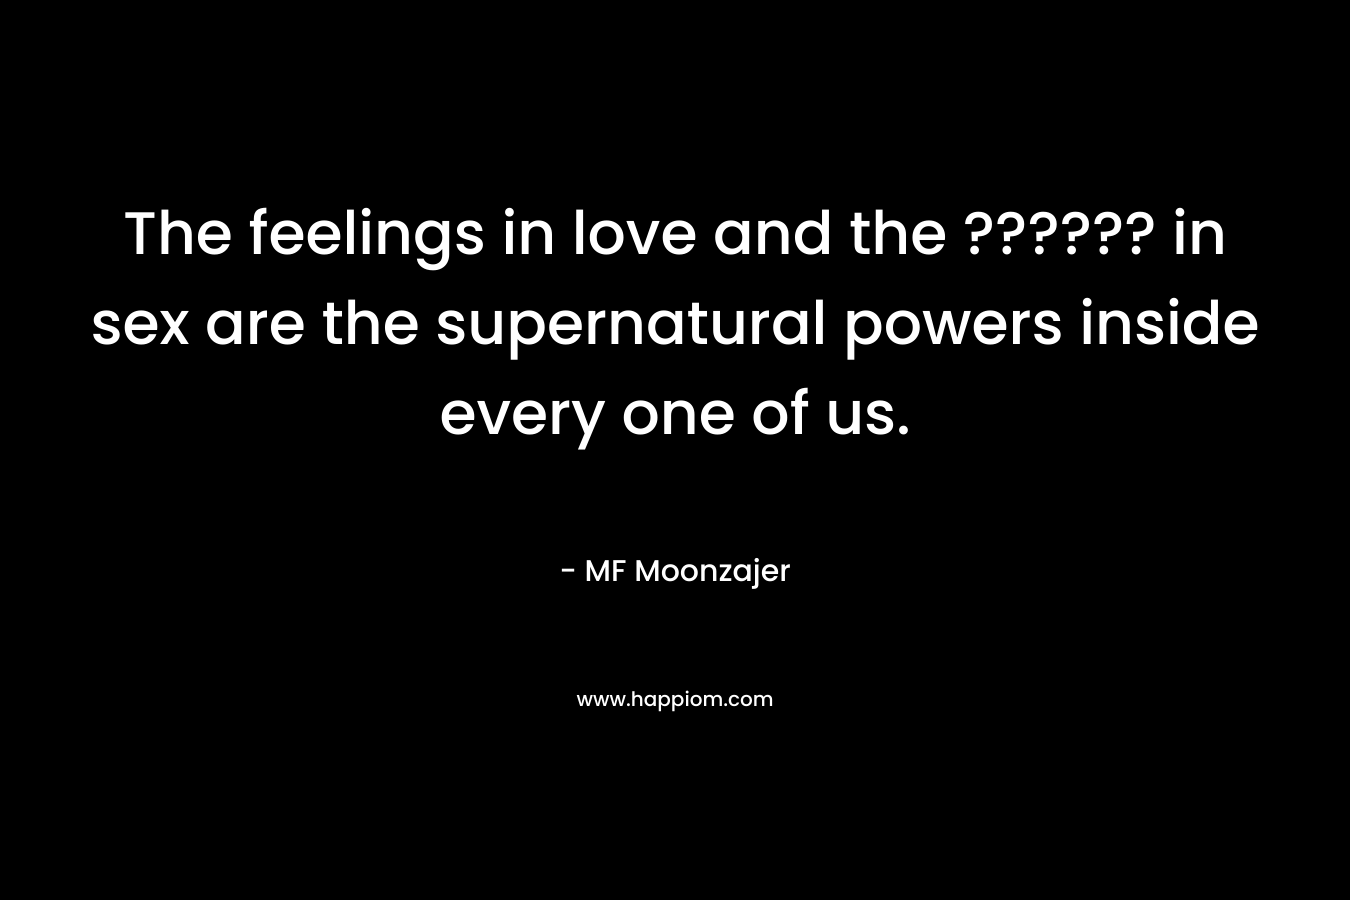 The feelings in love and the ?????? in sex are the supernatural powers inside every one of us.